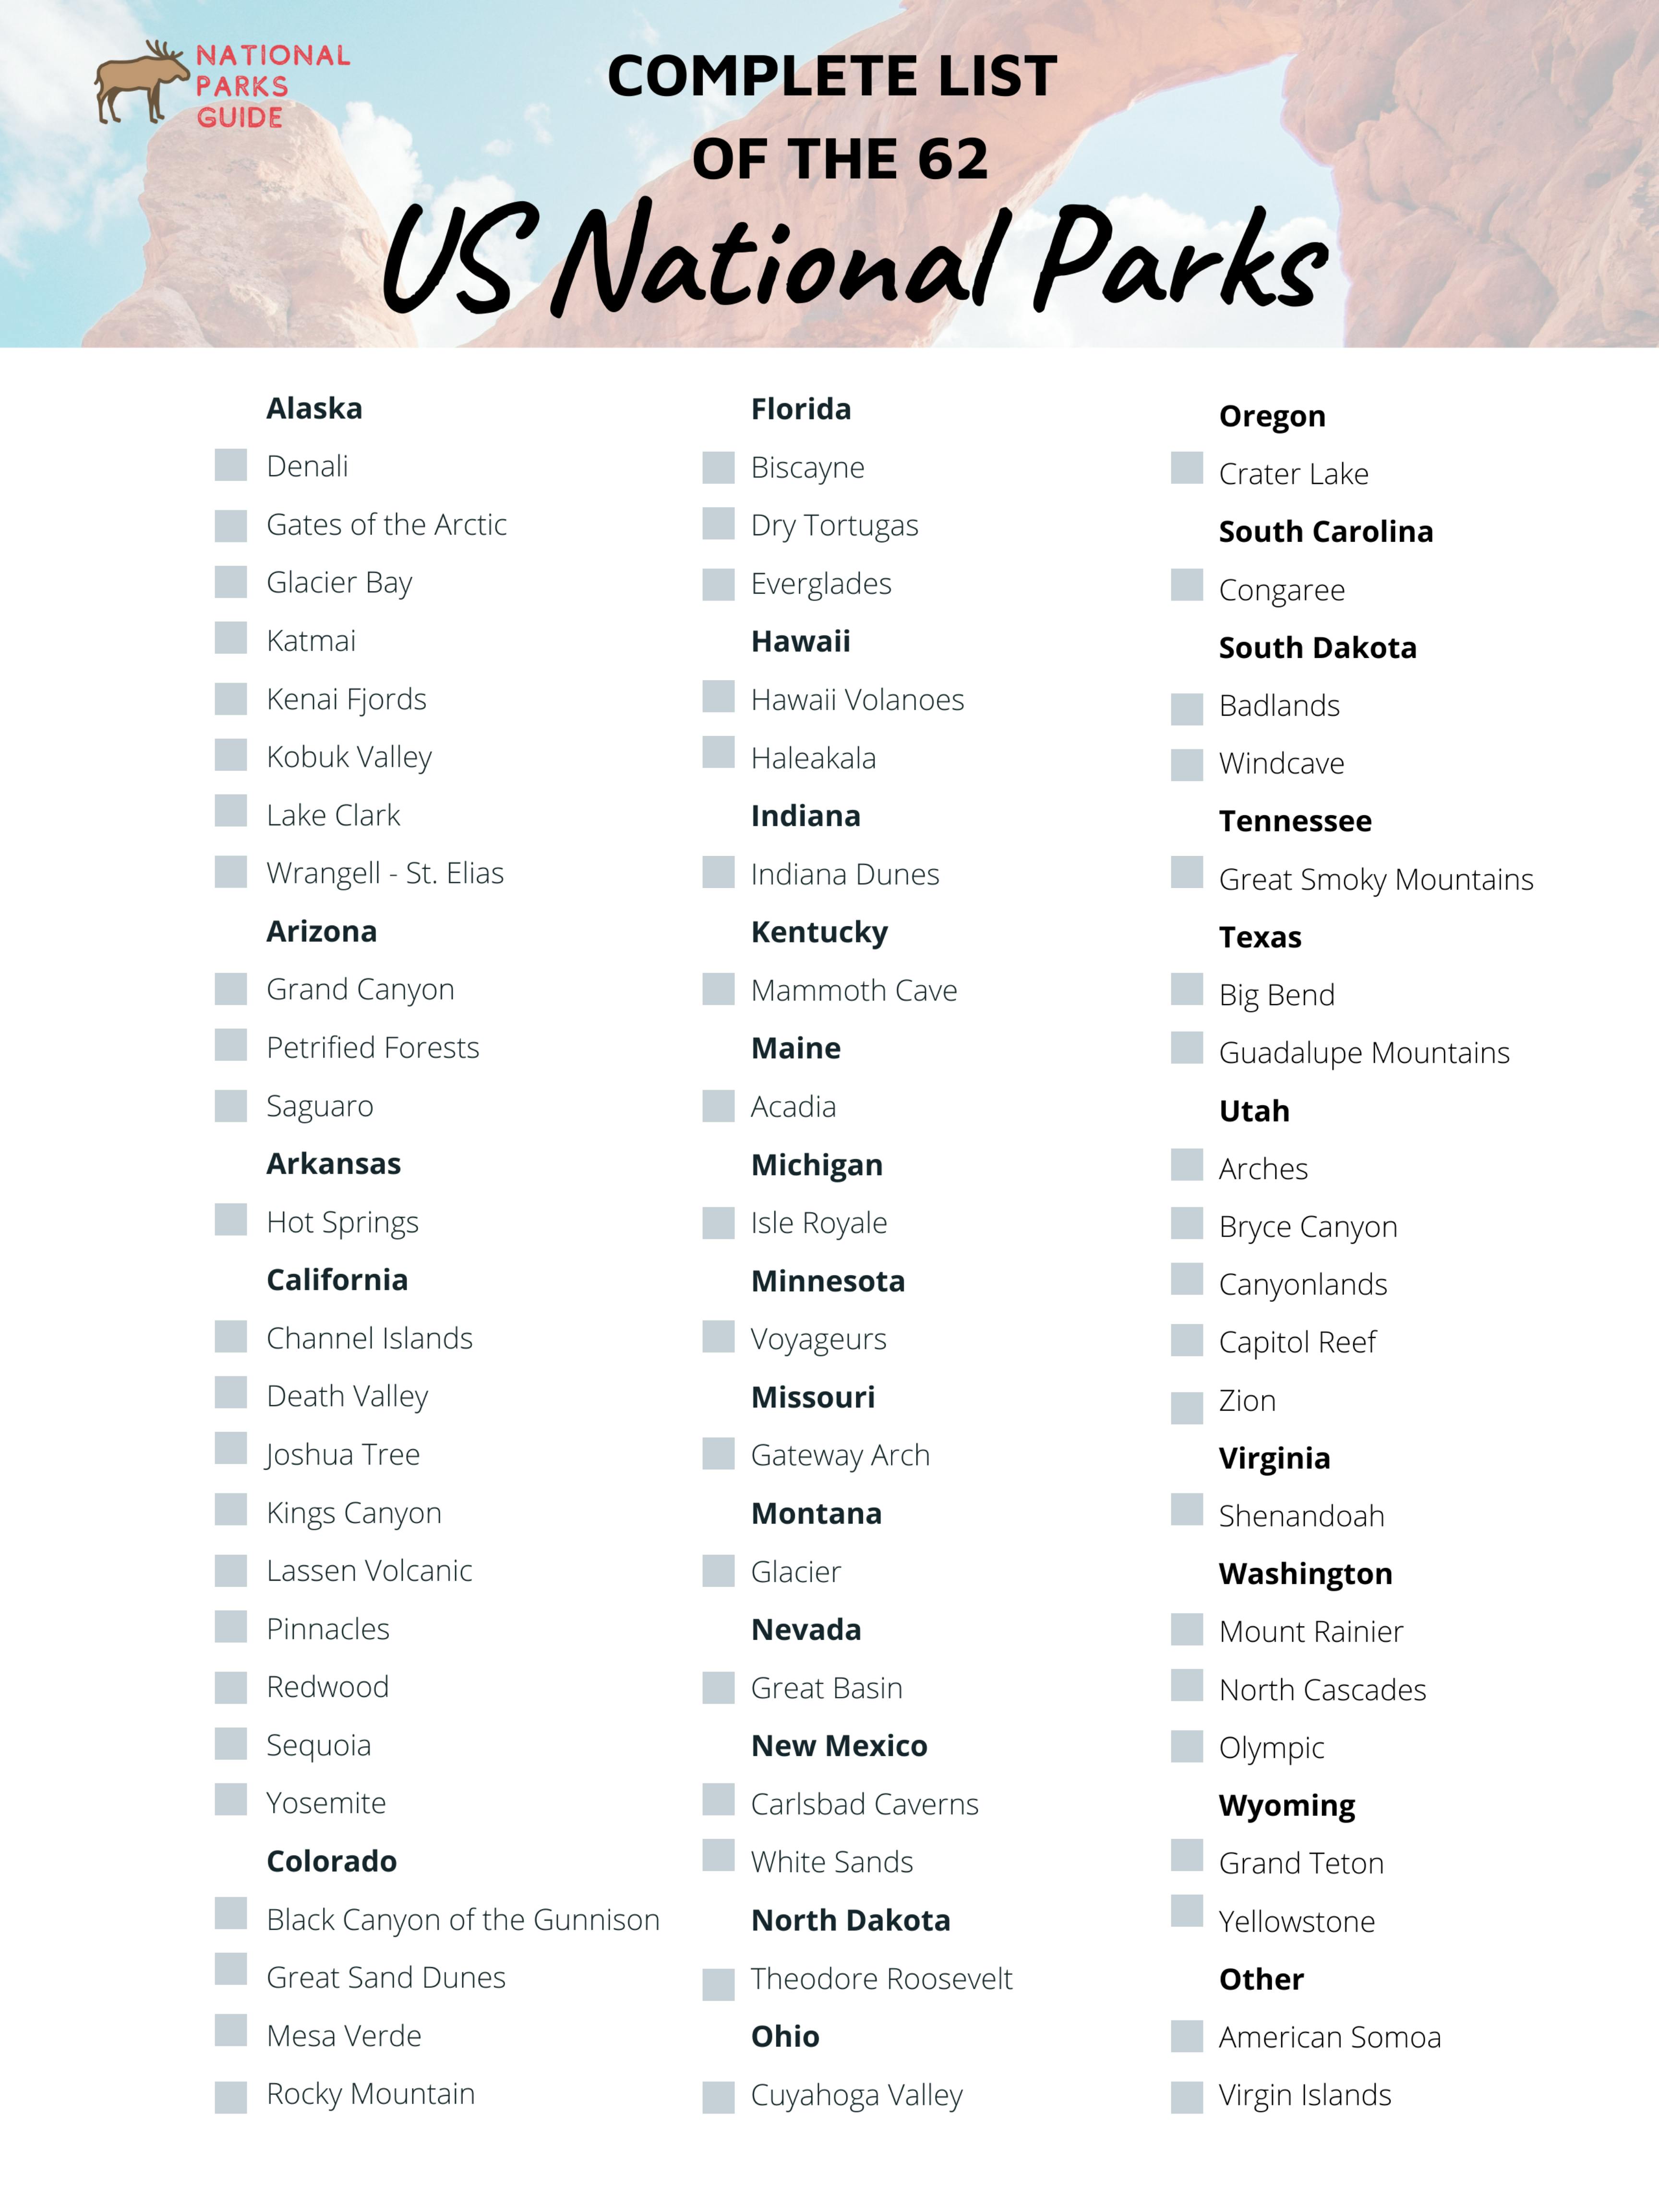 Complete List of the 62 National Parks in 2020